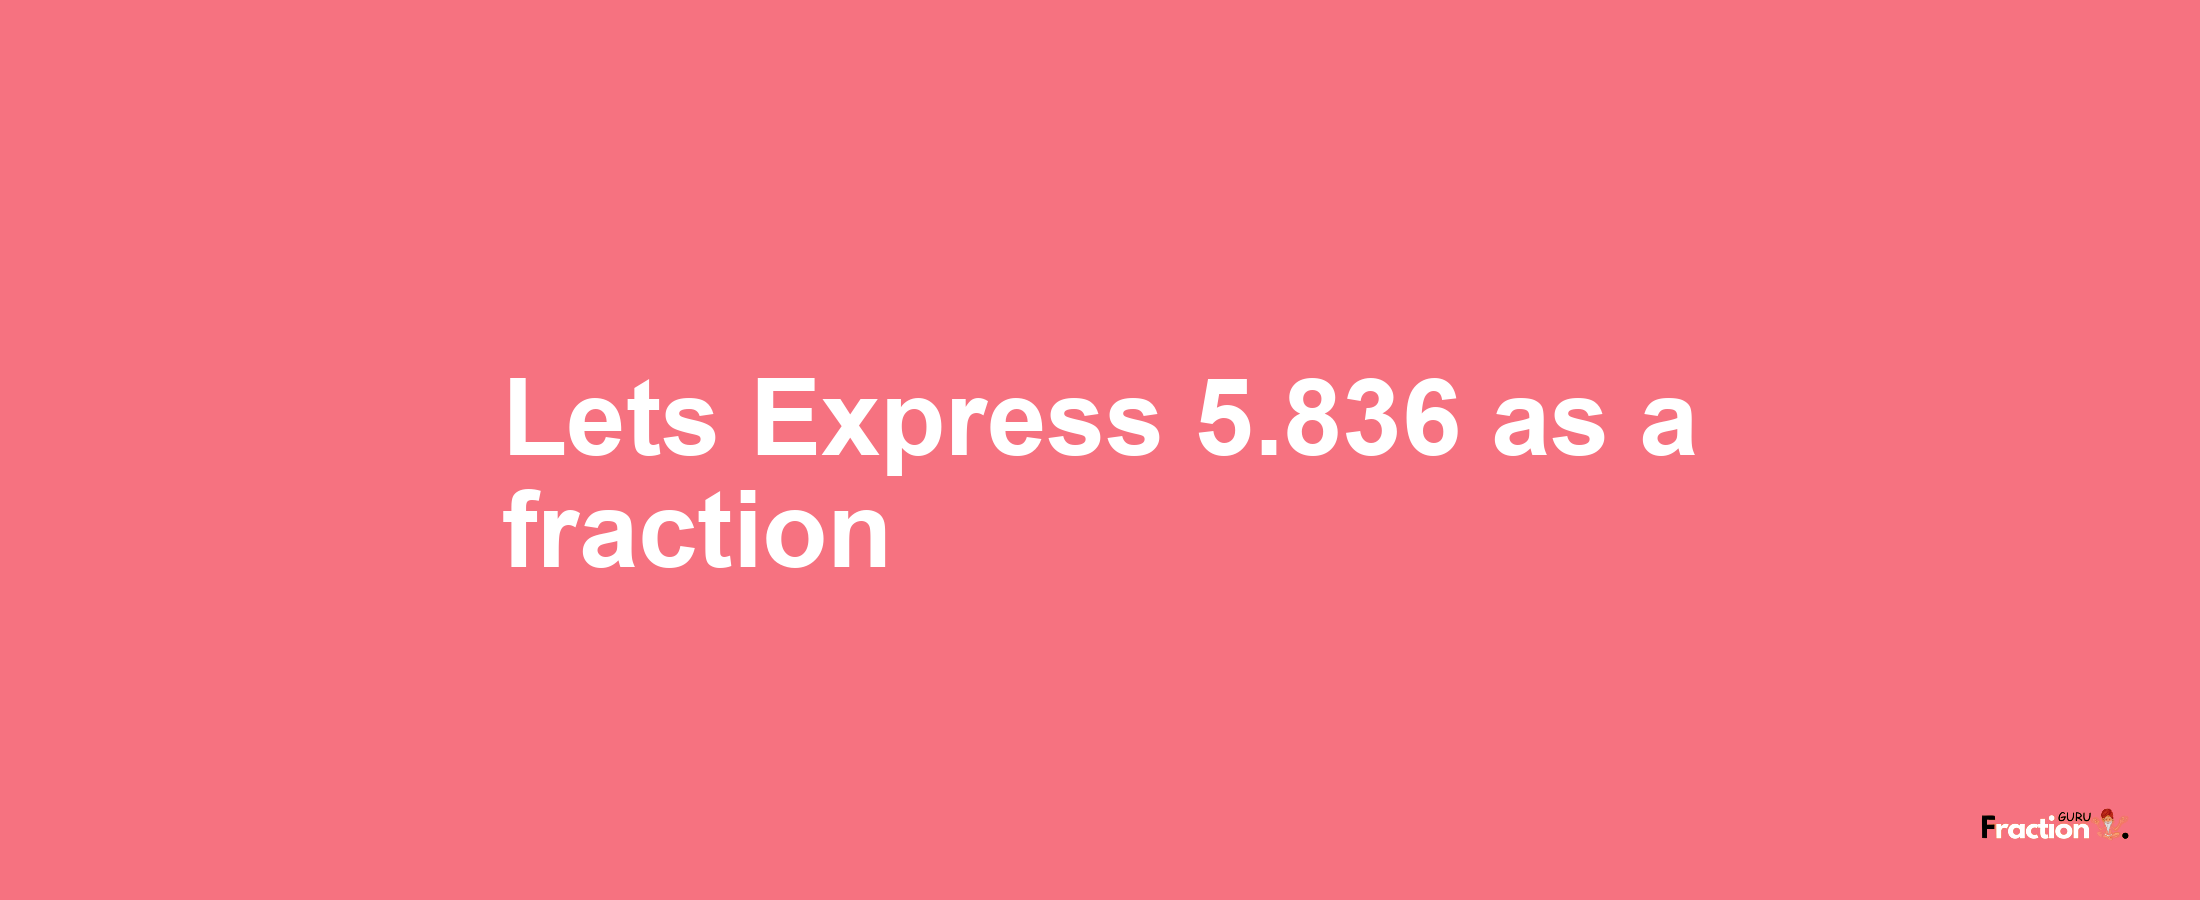 Lets Express 5.836 as afraction